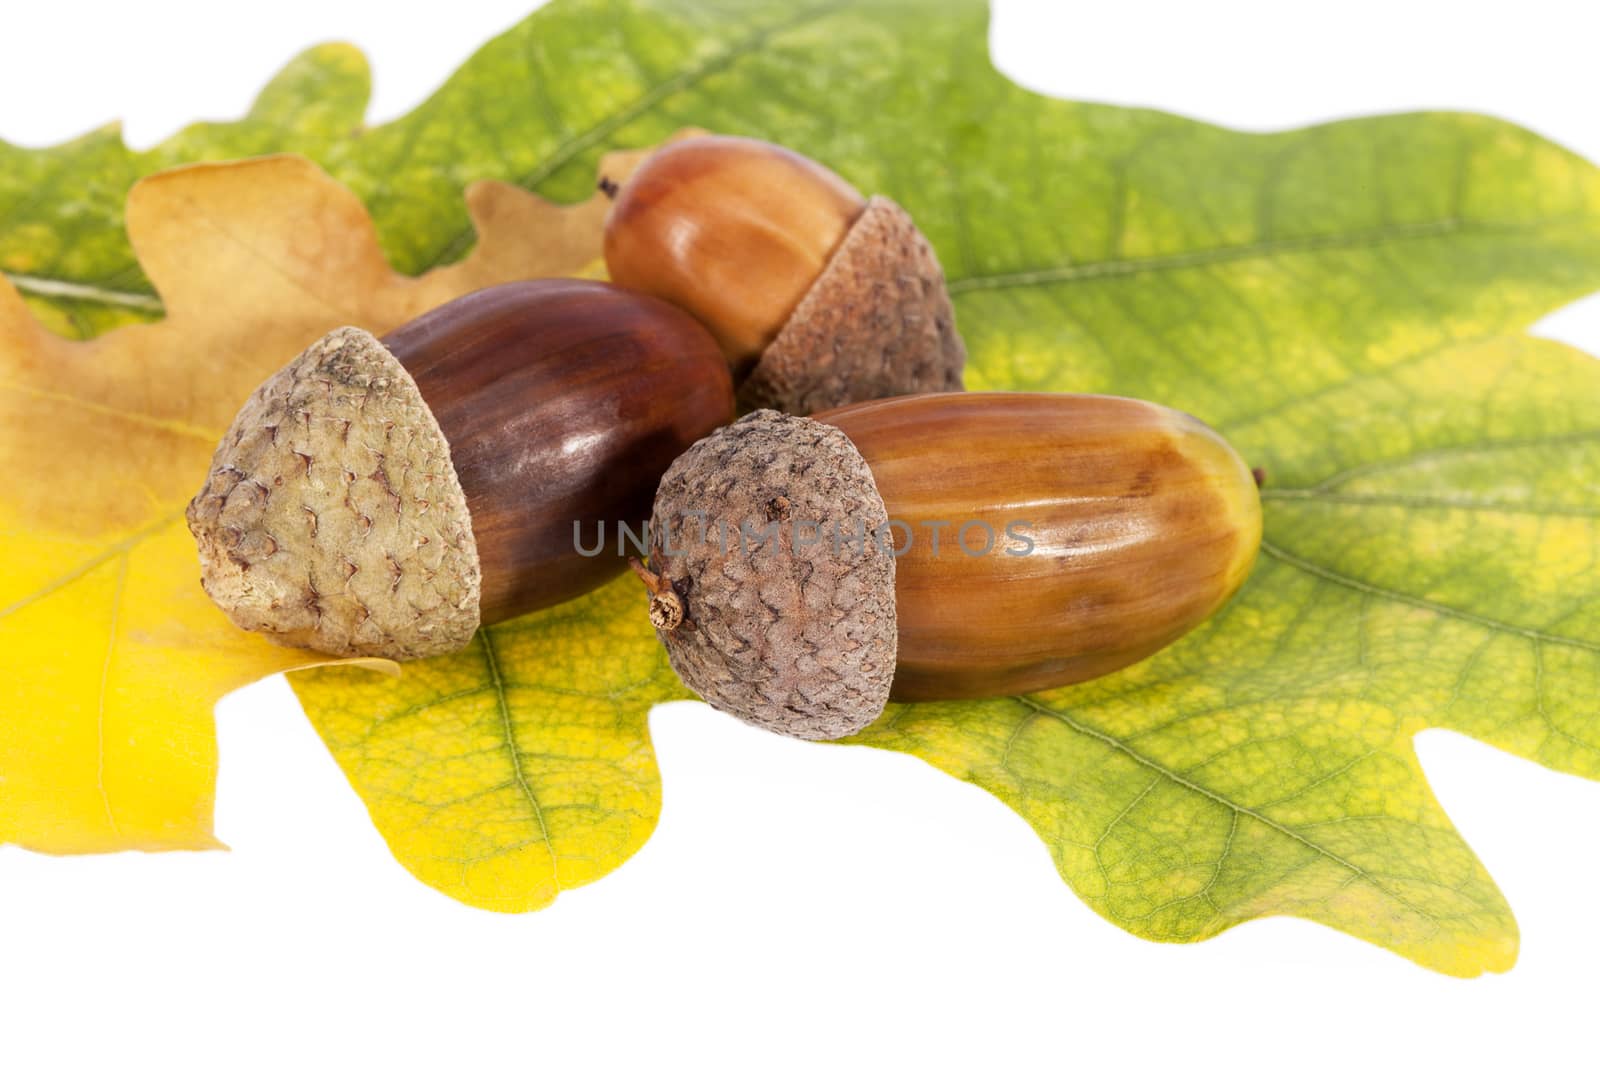  Acorns on oak leaves in autumnal colors, close up by mychadre77